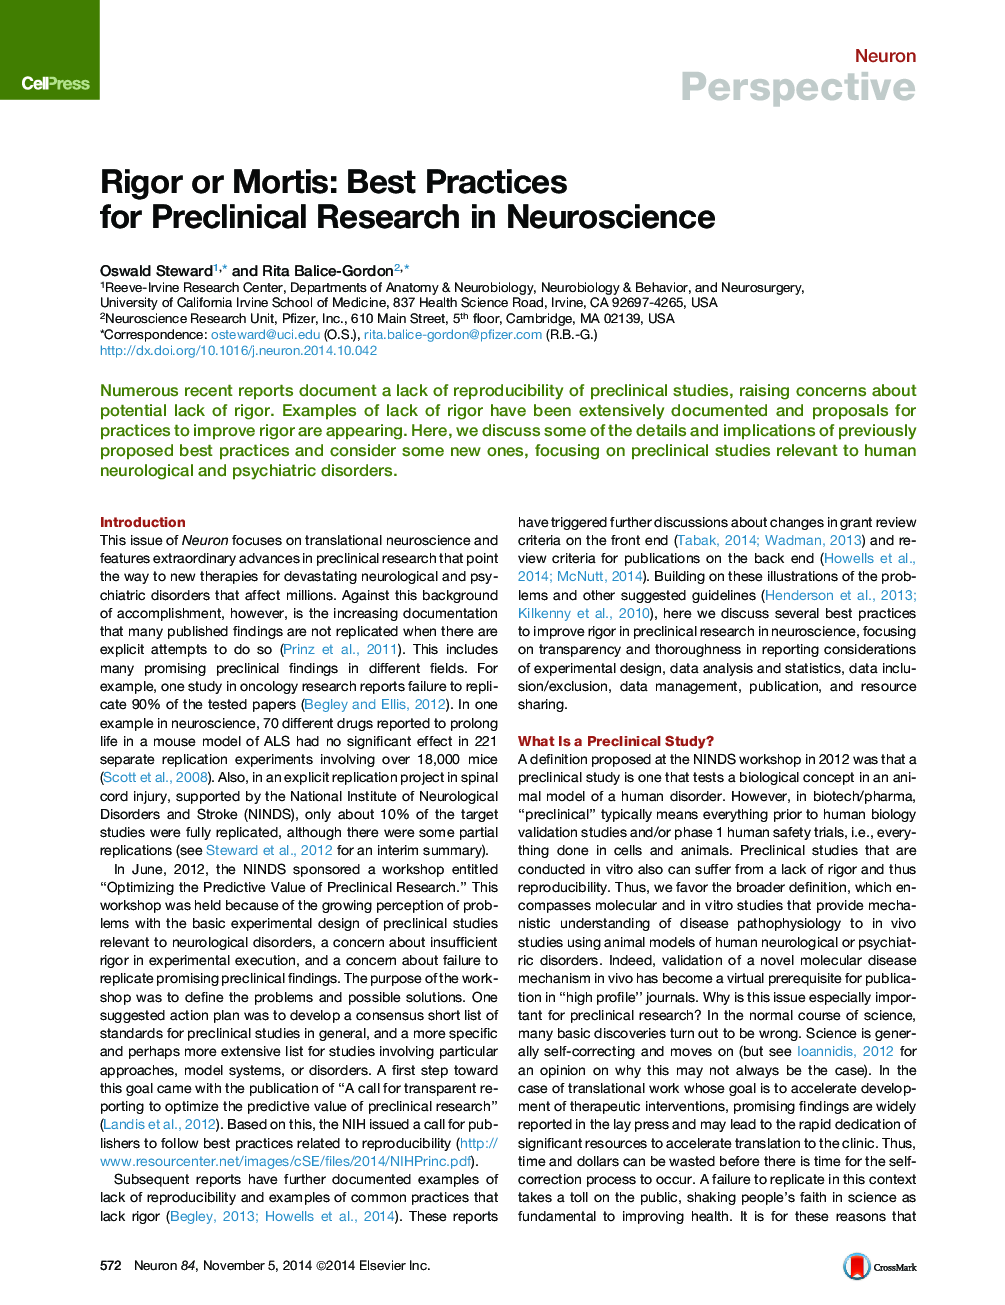 Rigor or Mortis: Best Practices for Preclinical Research in Neuroscience